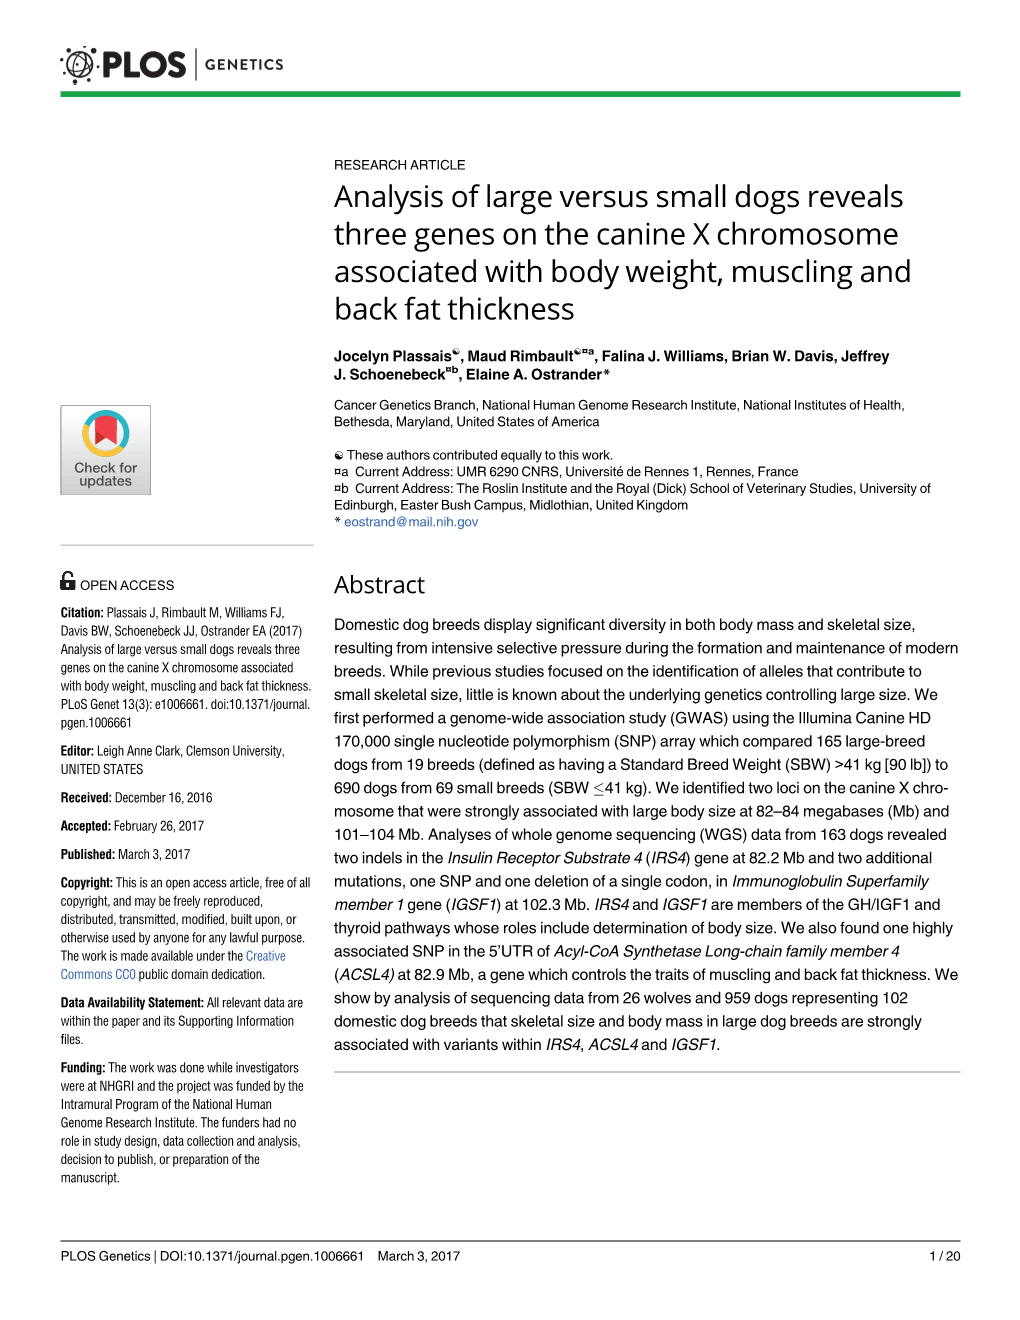 Analysis of Large Versus Small Dogs Reveals Three Genes on the Canine X Chromosome Associated with Body Weight, Muscling and Back Fat Thickness